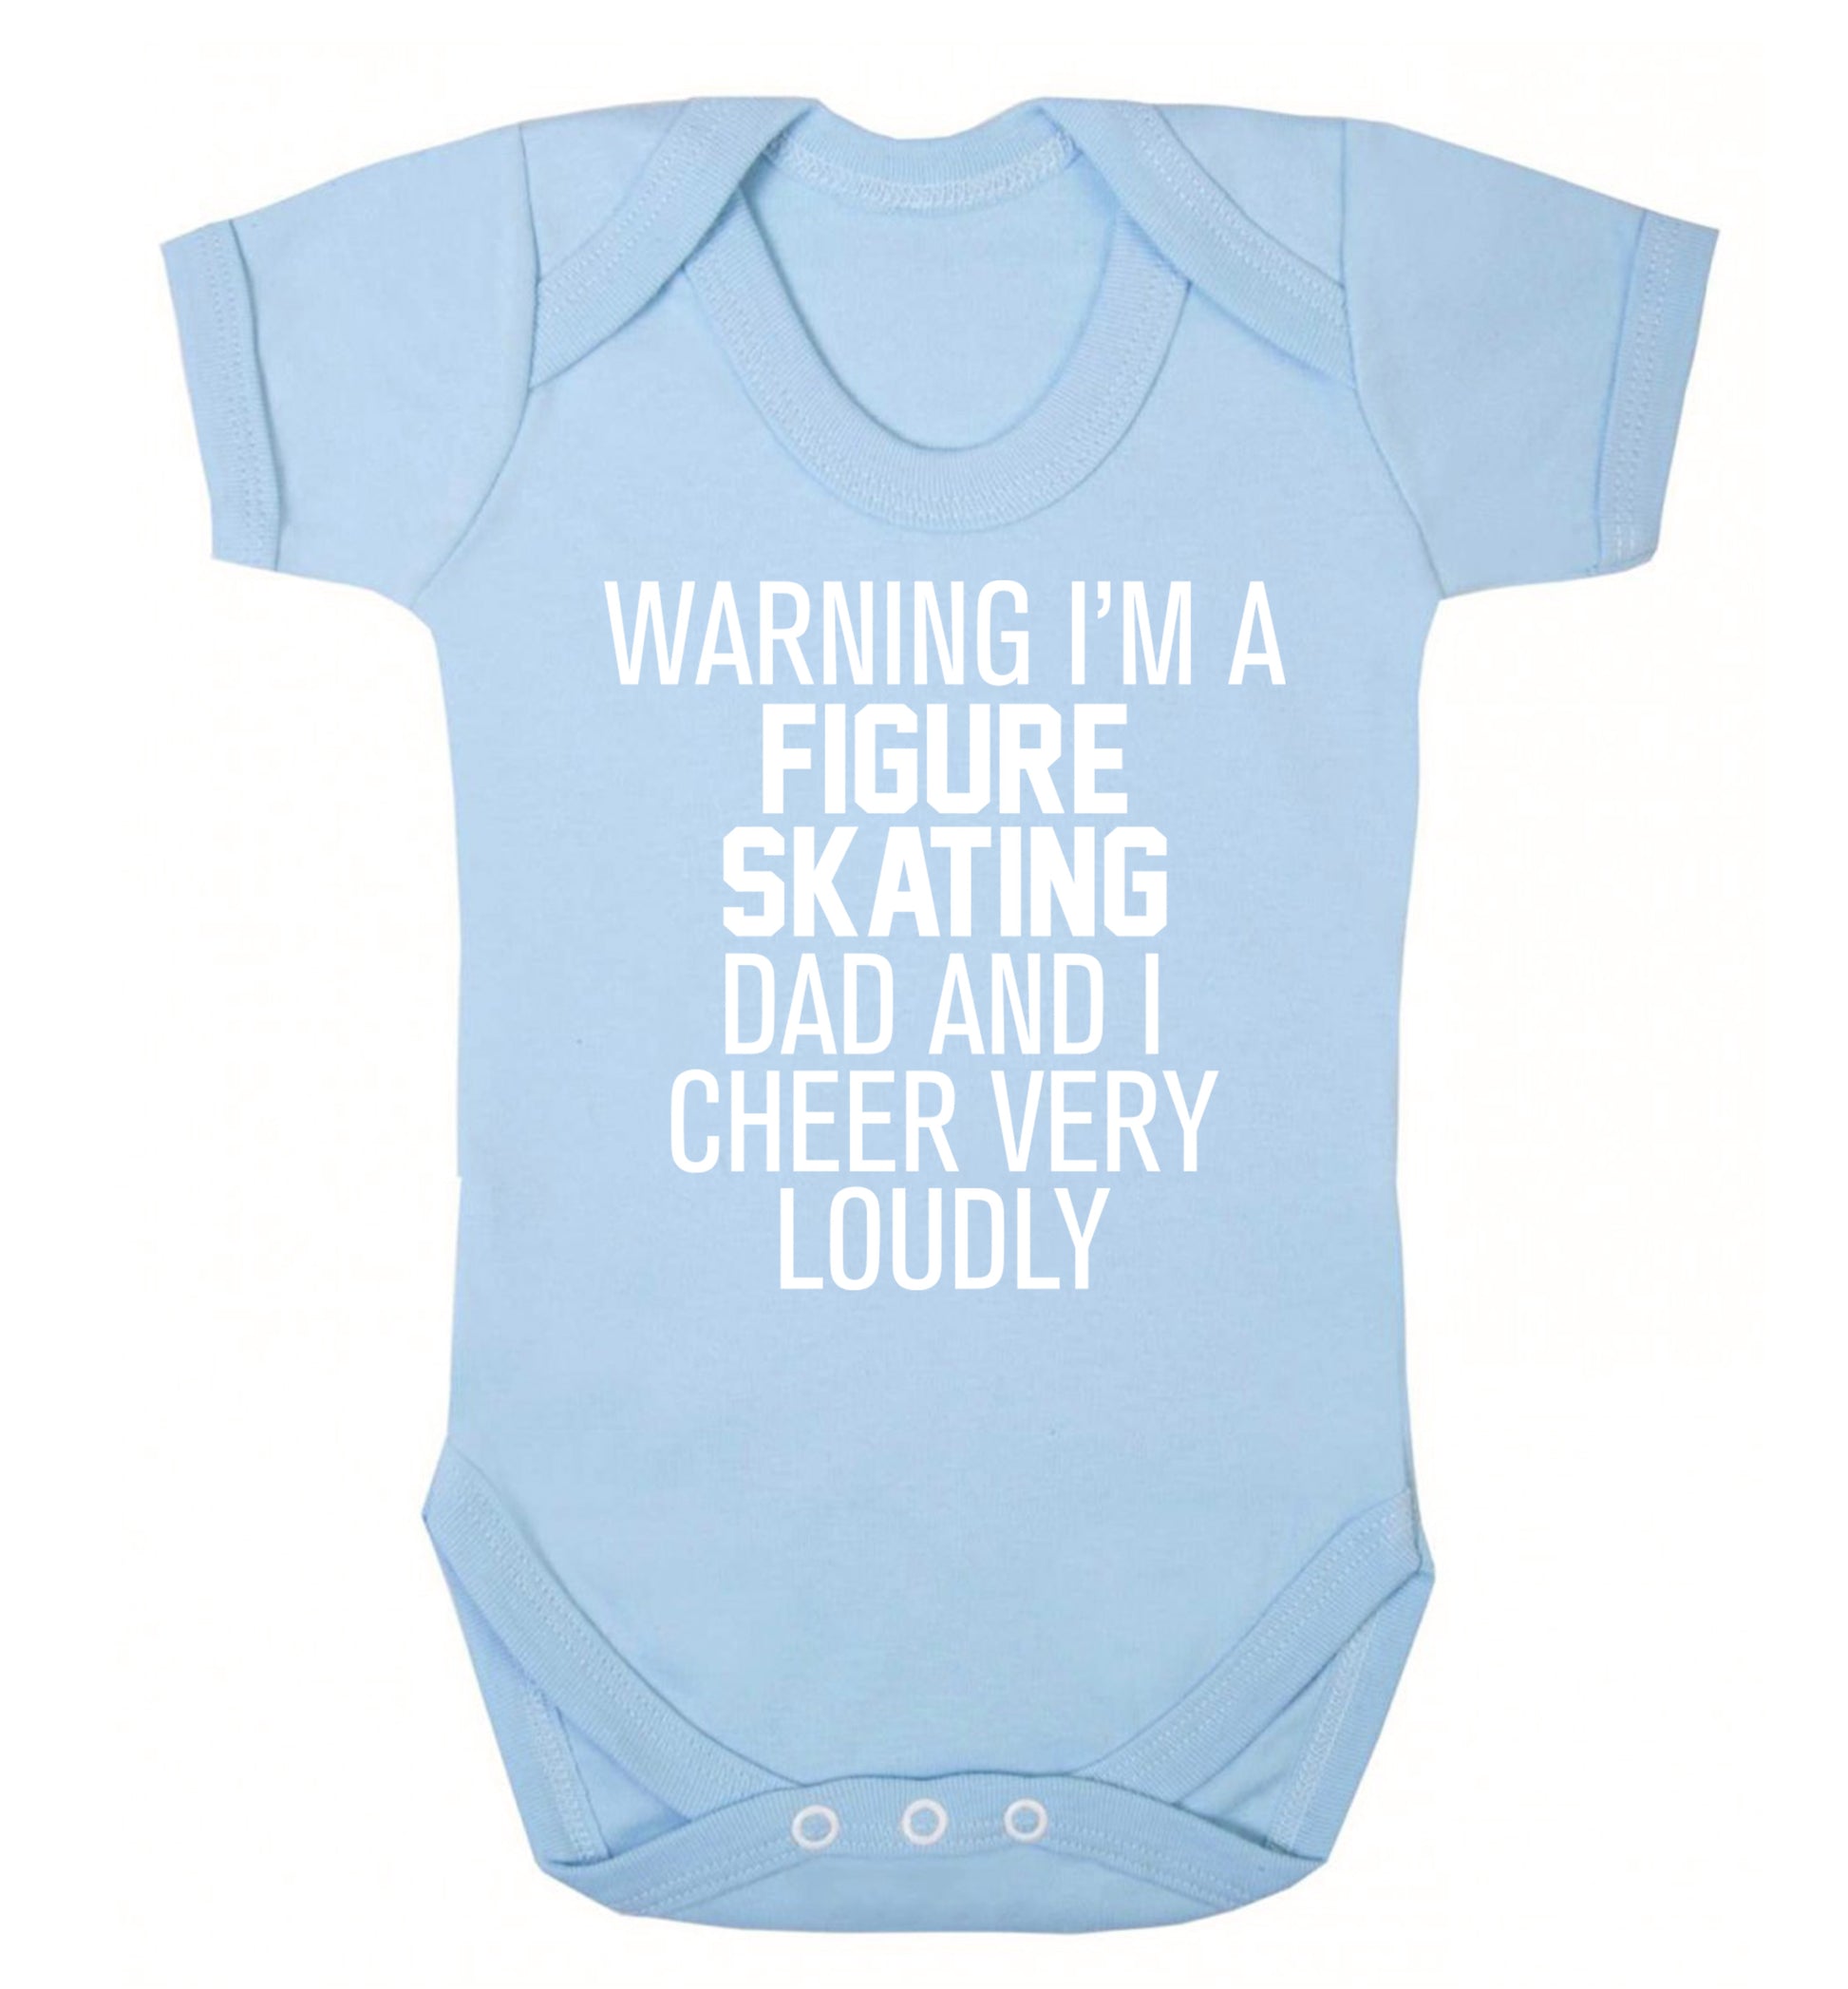 Warning I'm a figure skating dad and I cheer very loudly Baby Vest pale blue 18-24 months